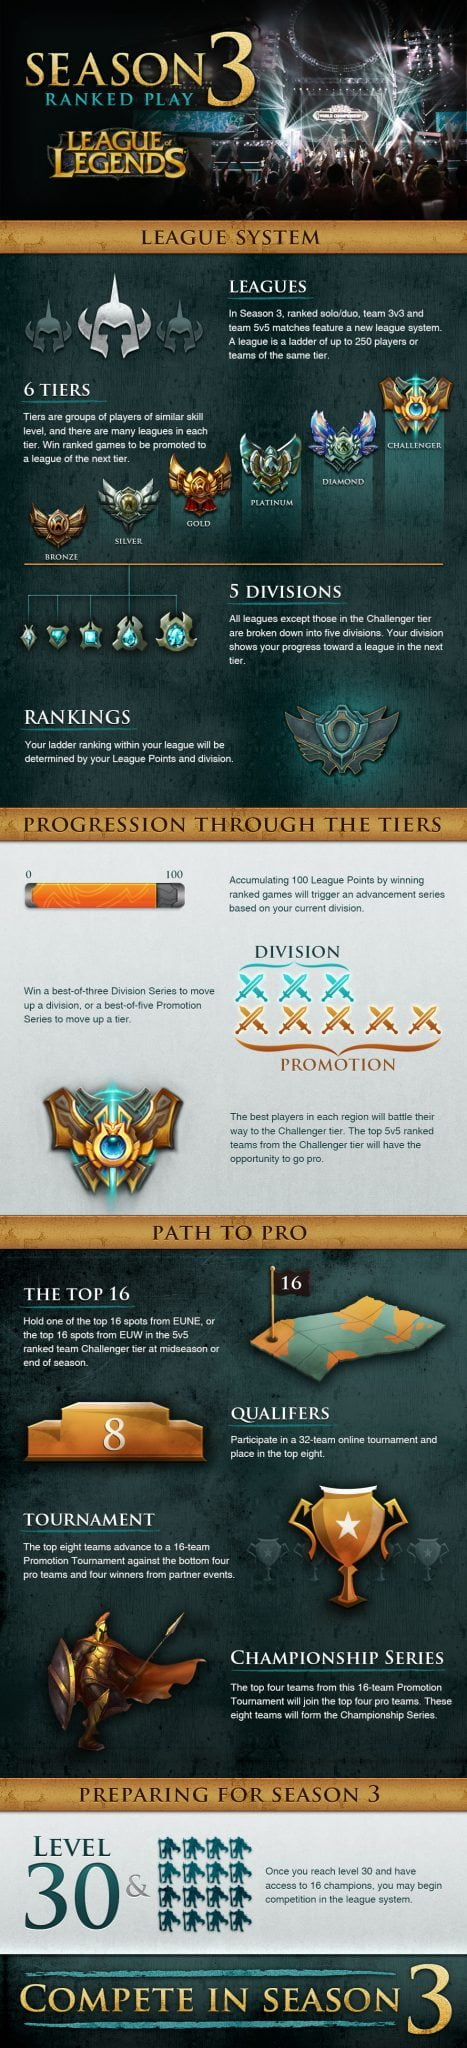 Infographic for New League System in Season 3